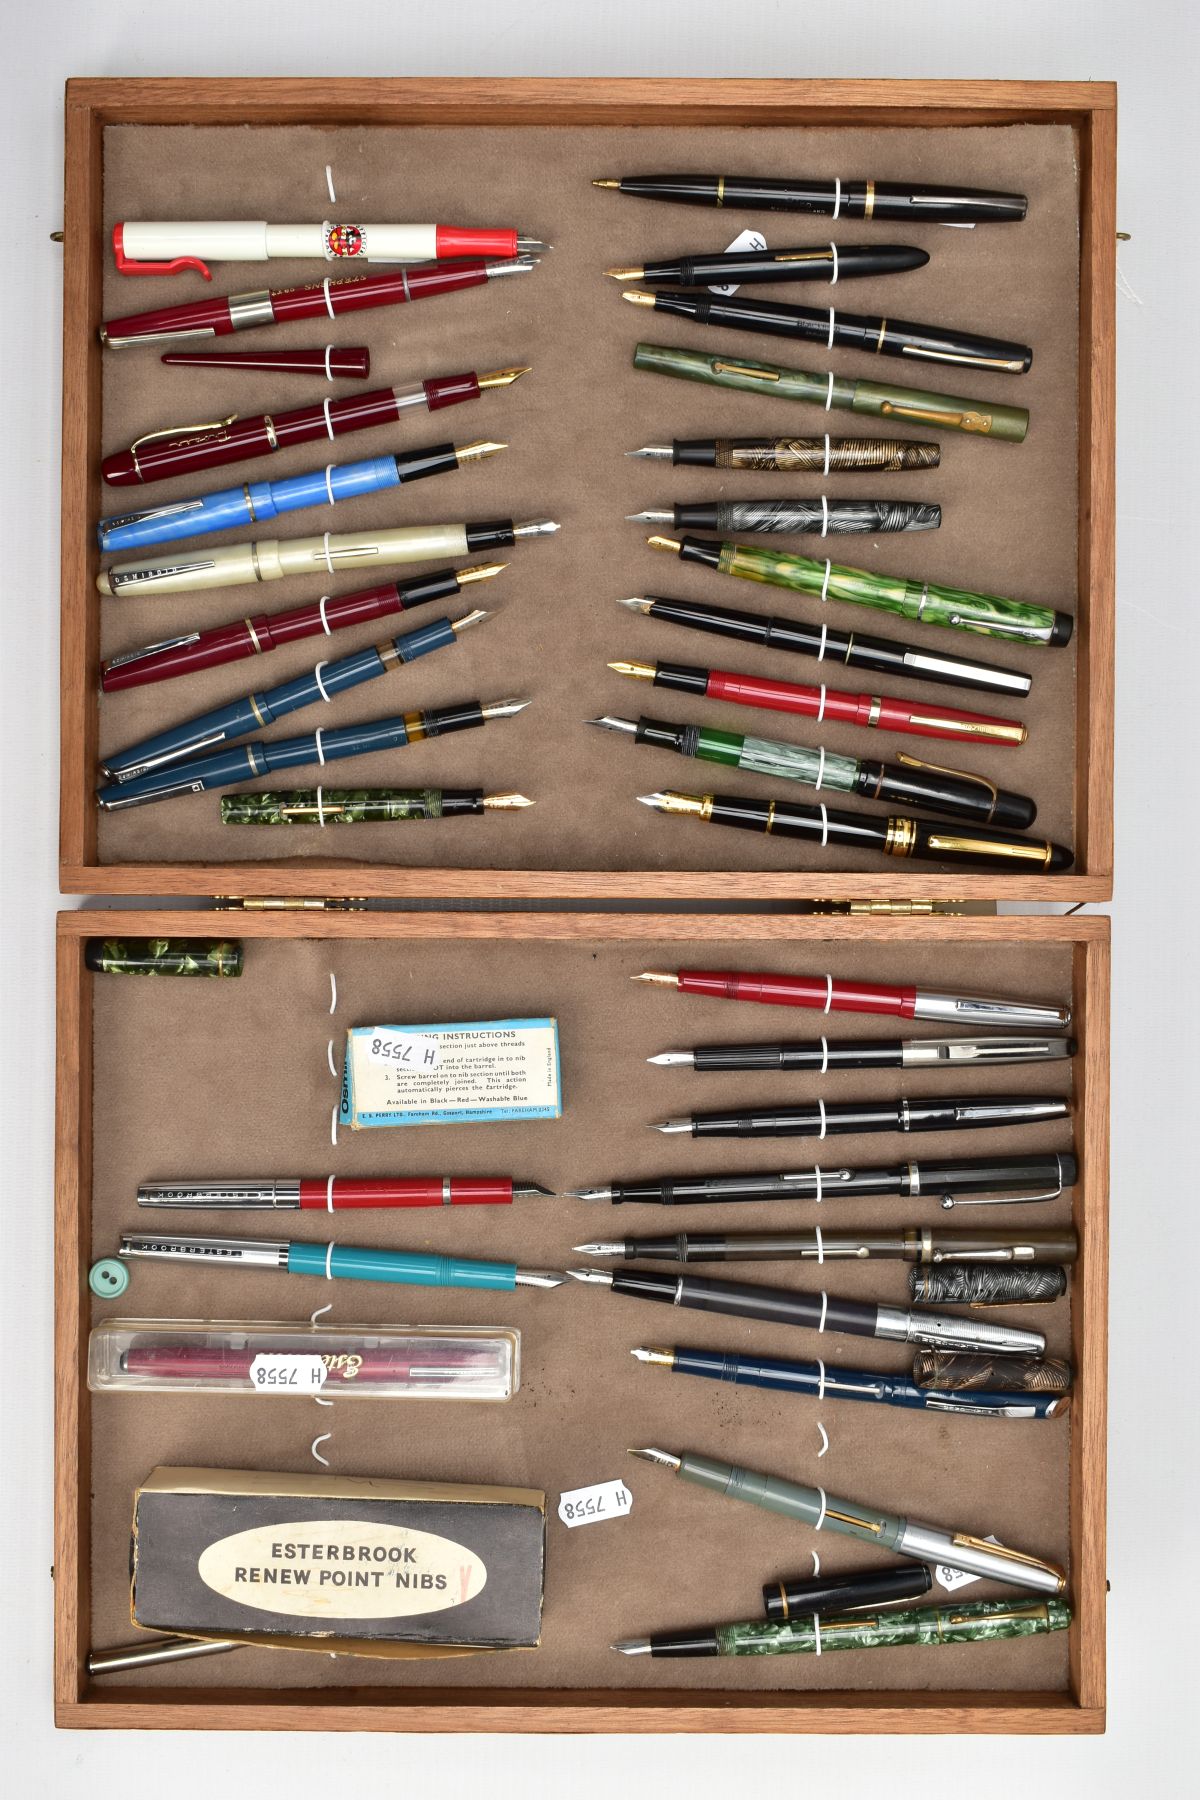 THIRTY ONE VINTAGE AND MODERN FOUNTAIN PENS in a bespoke hinged wooden display case, the pens